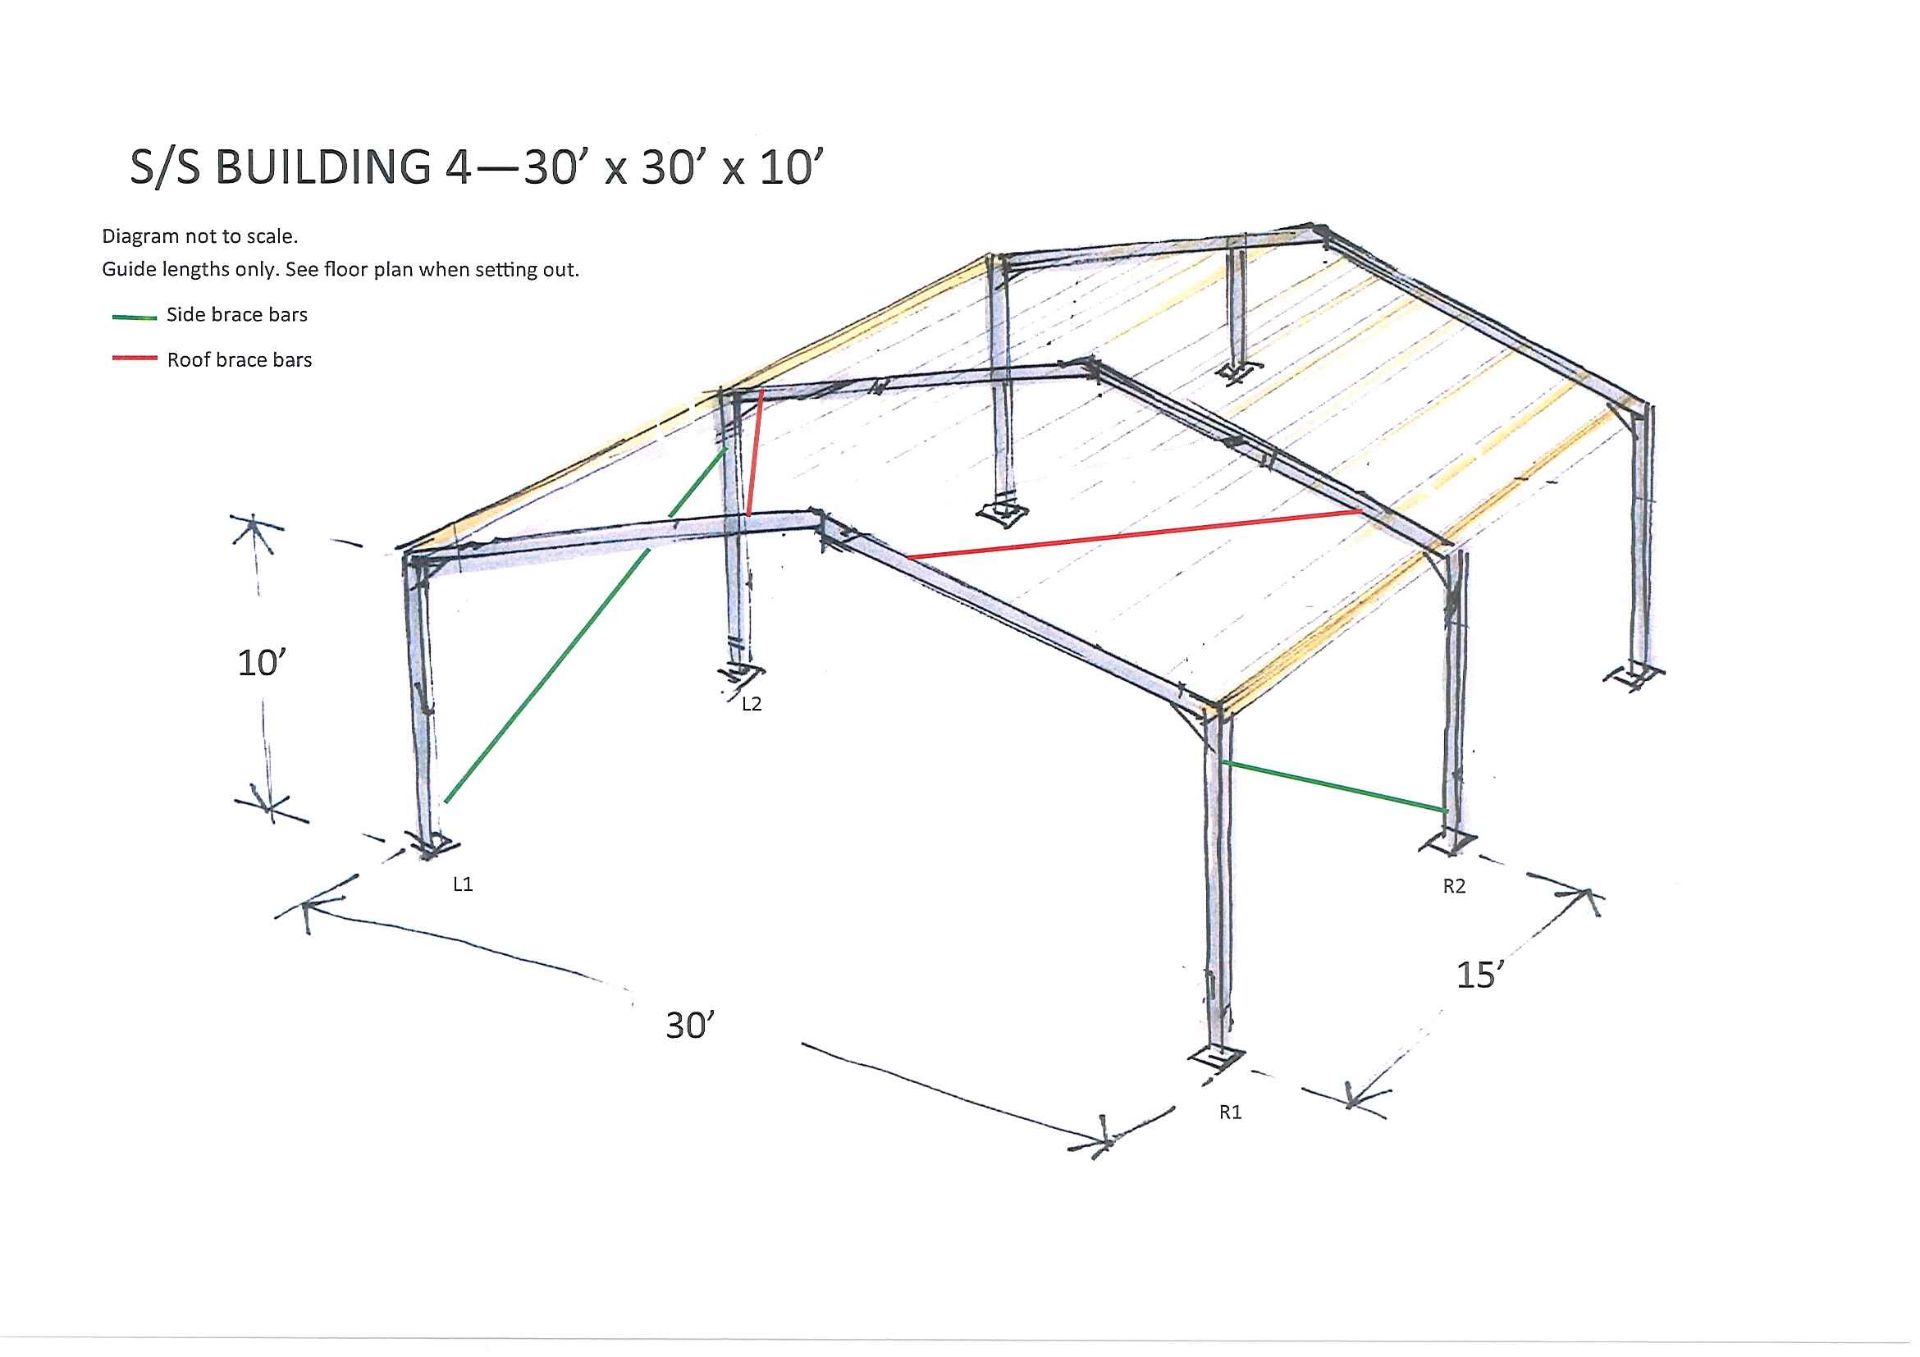 Building 4 - 30' x 30' x 10' Steel Framed Building - Non CE Stamped